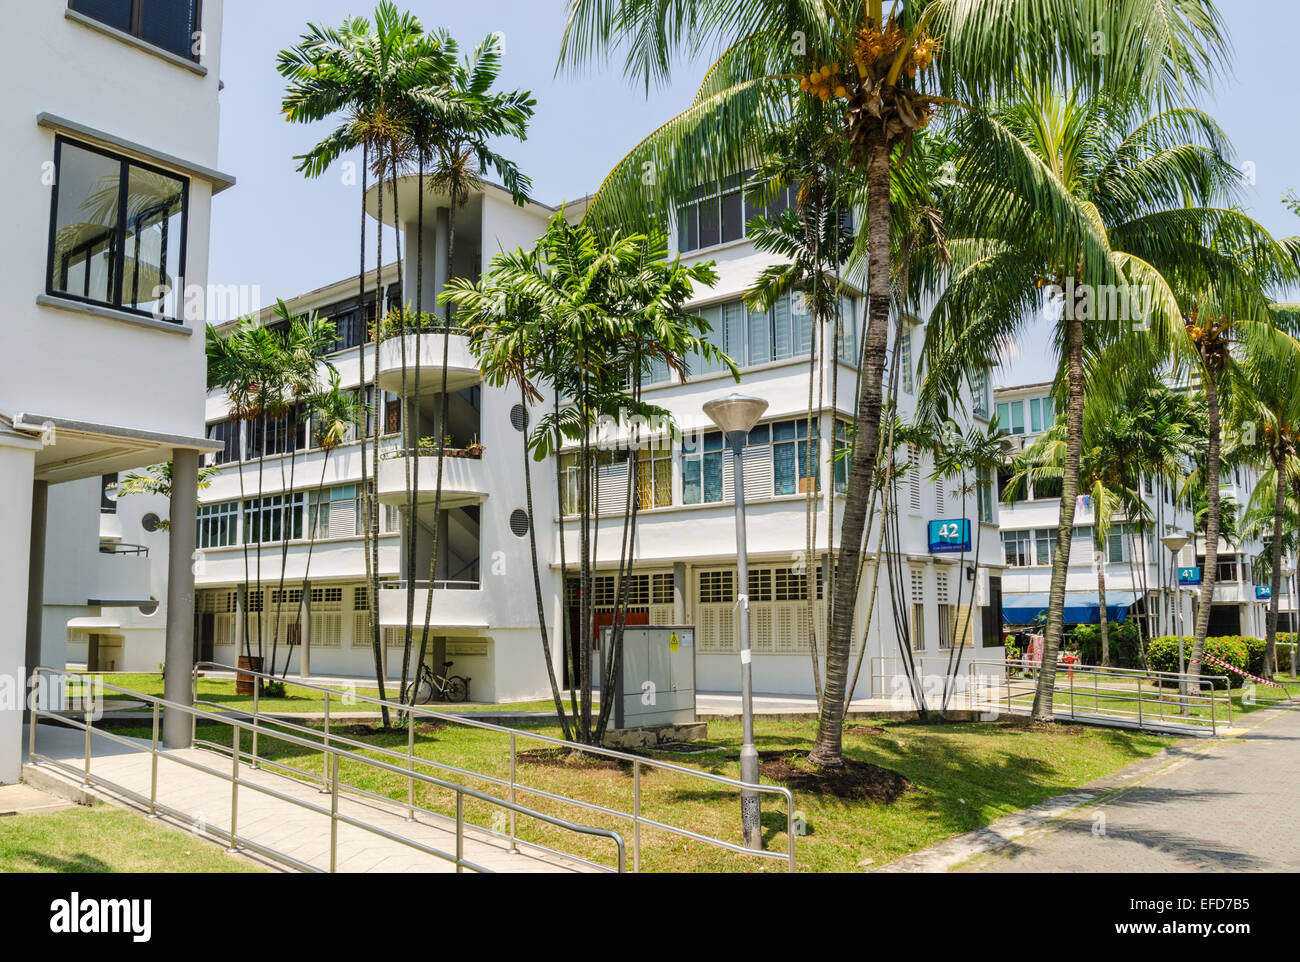 Palm trees gardens and post-war four-storey blocks of flats in the Tiong Bahru Estate, Singapore Stock Photo